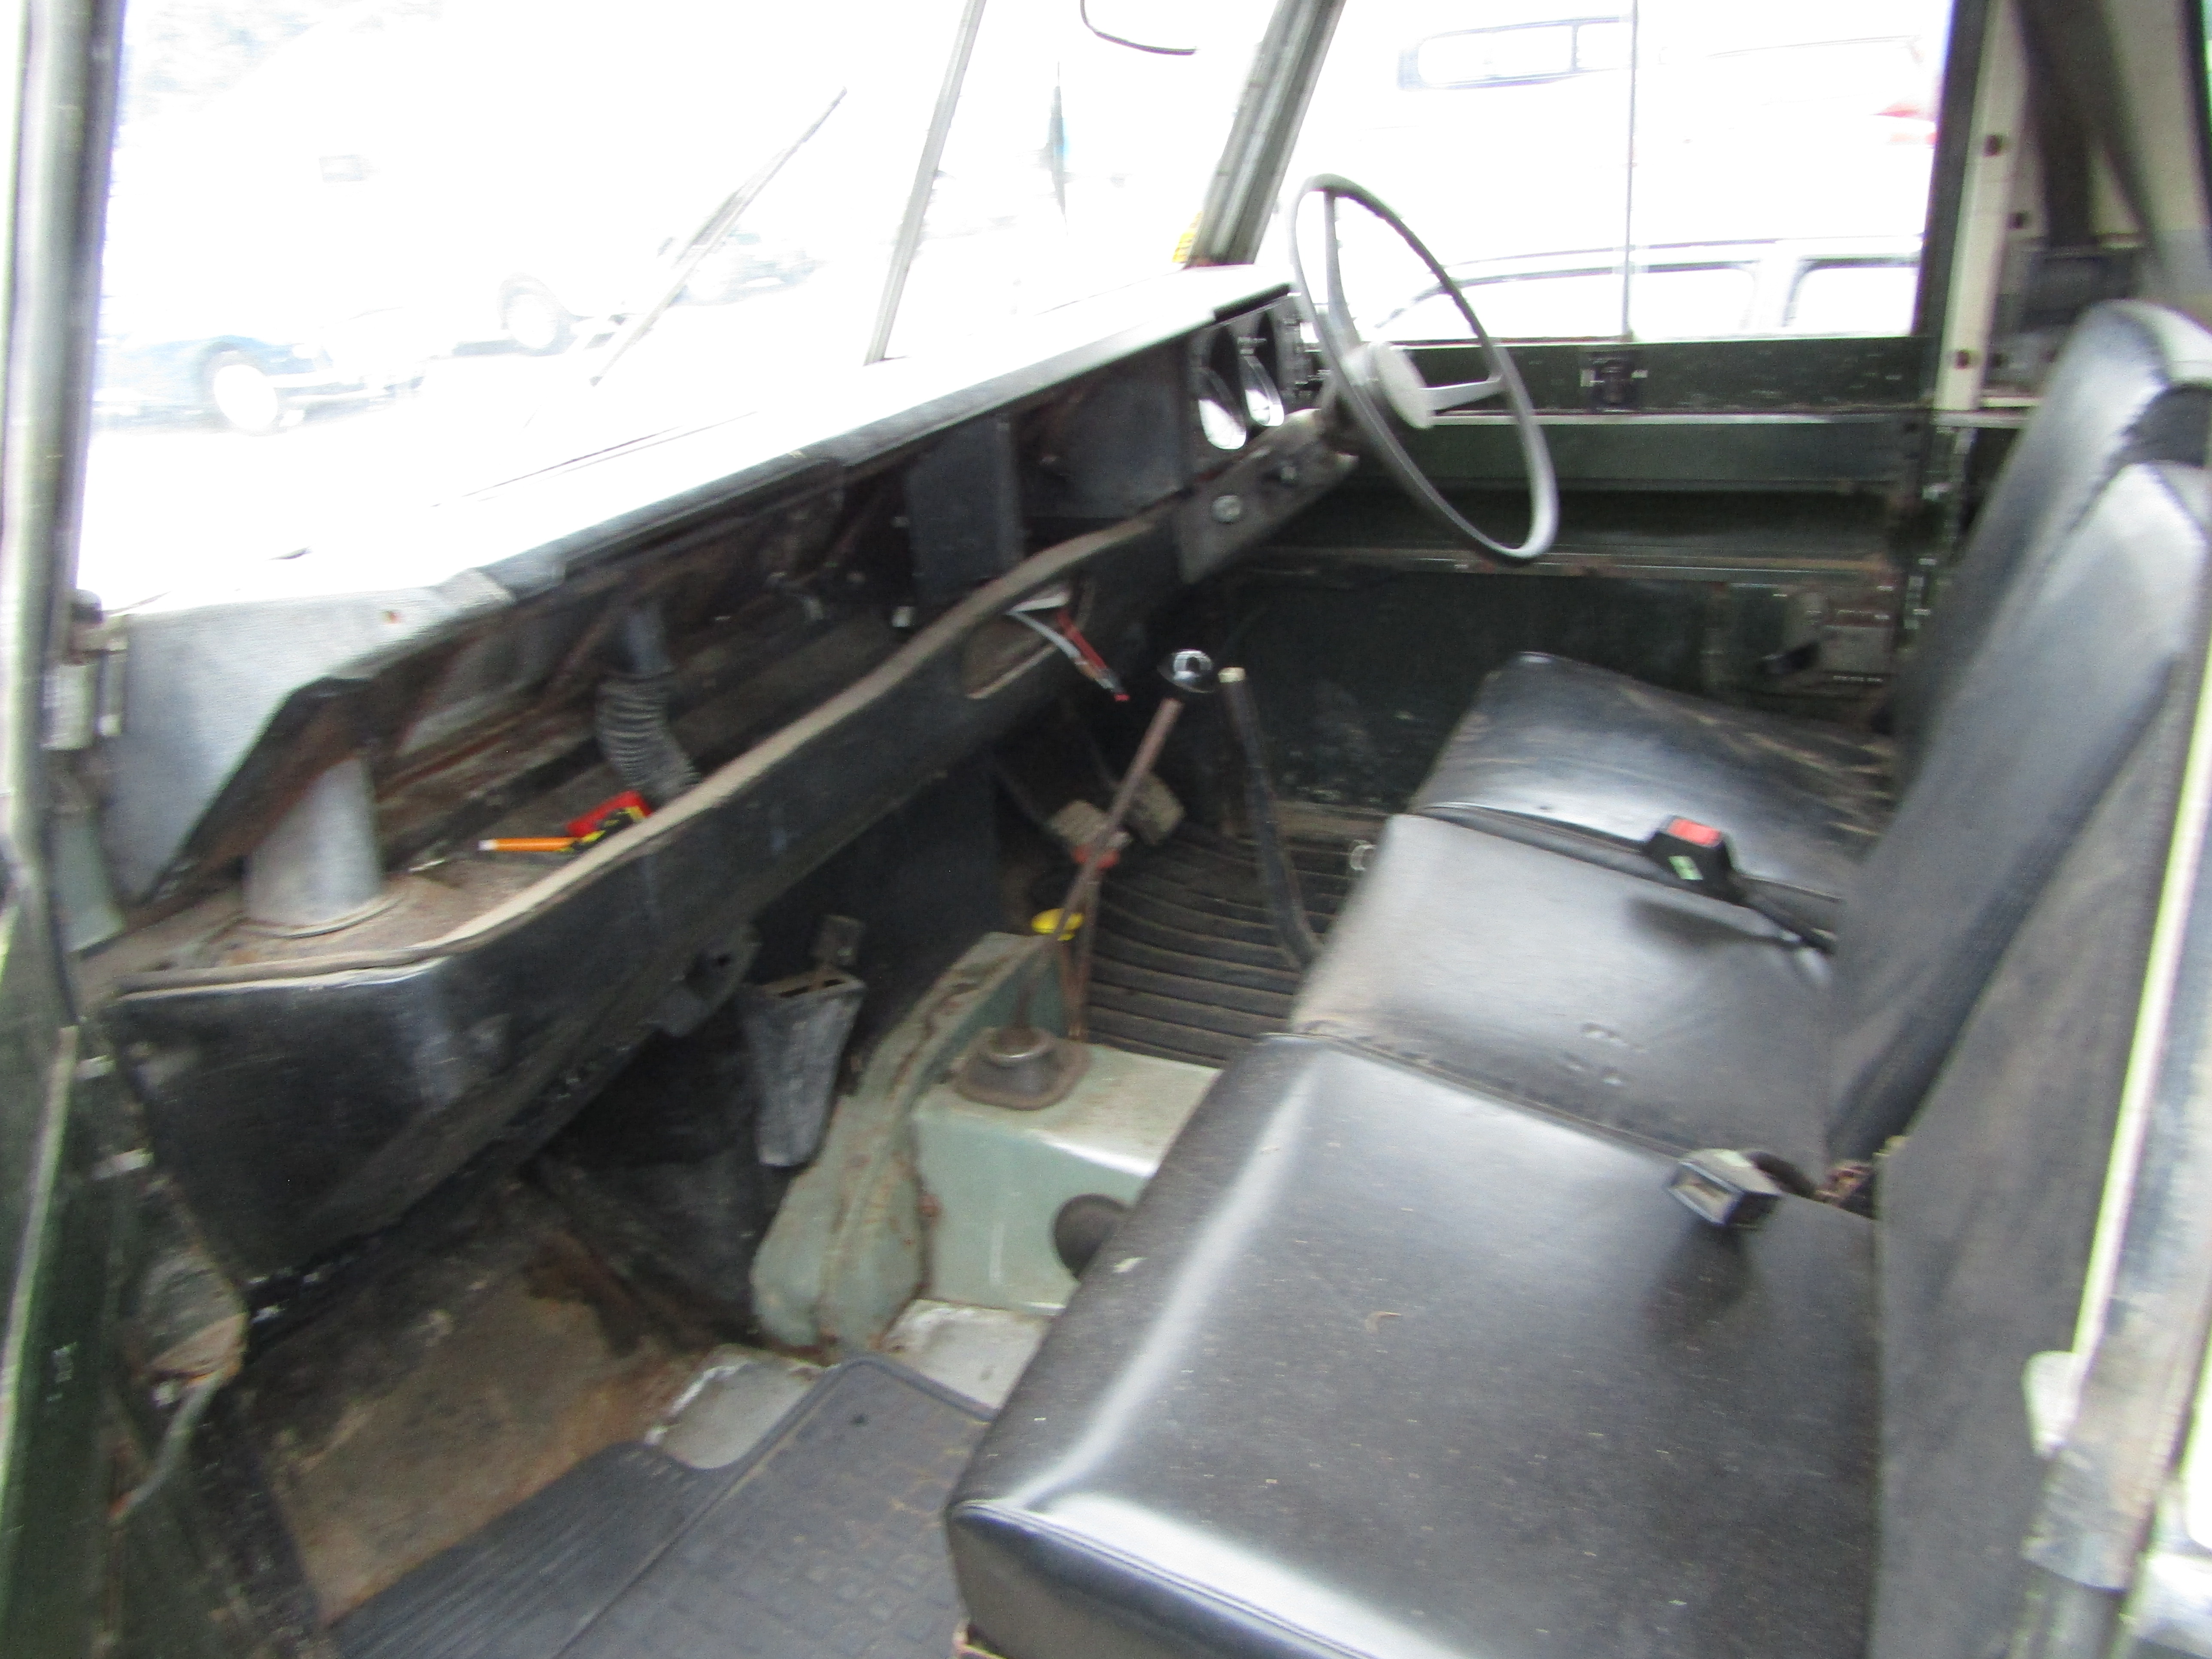 1981 Land Rover Series 3 SWB - Image 4 of 20